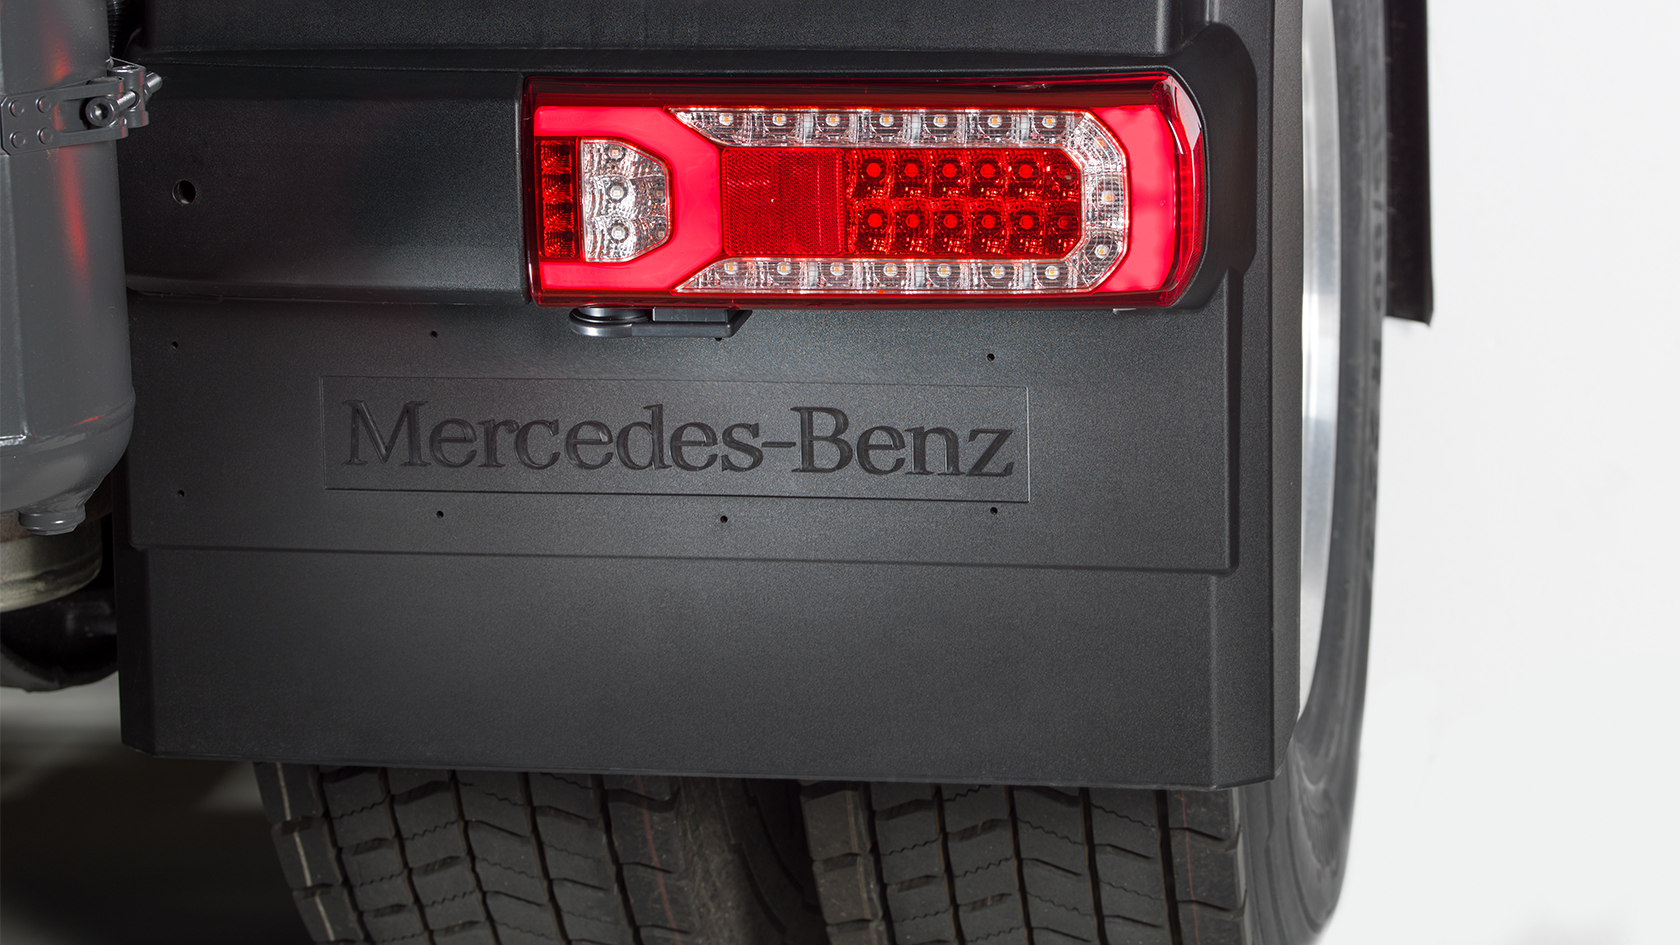 LED tail lamps.